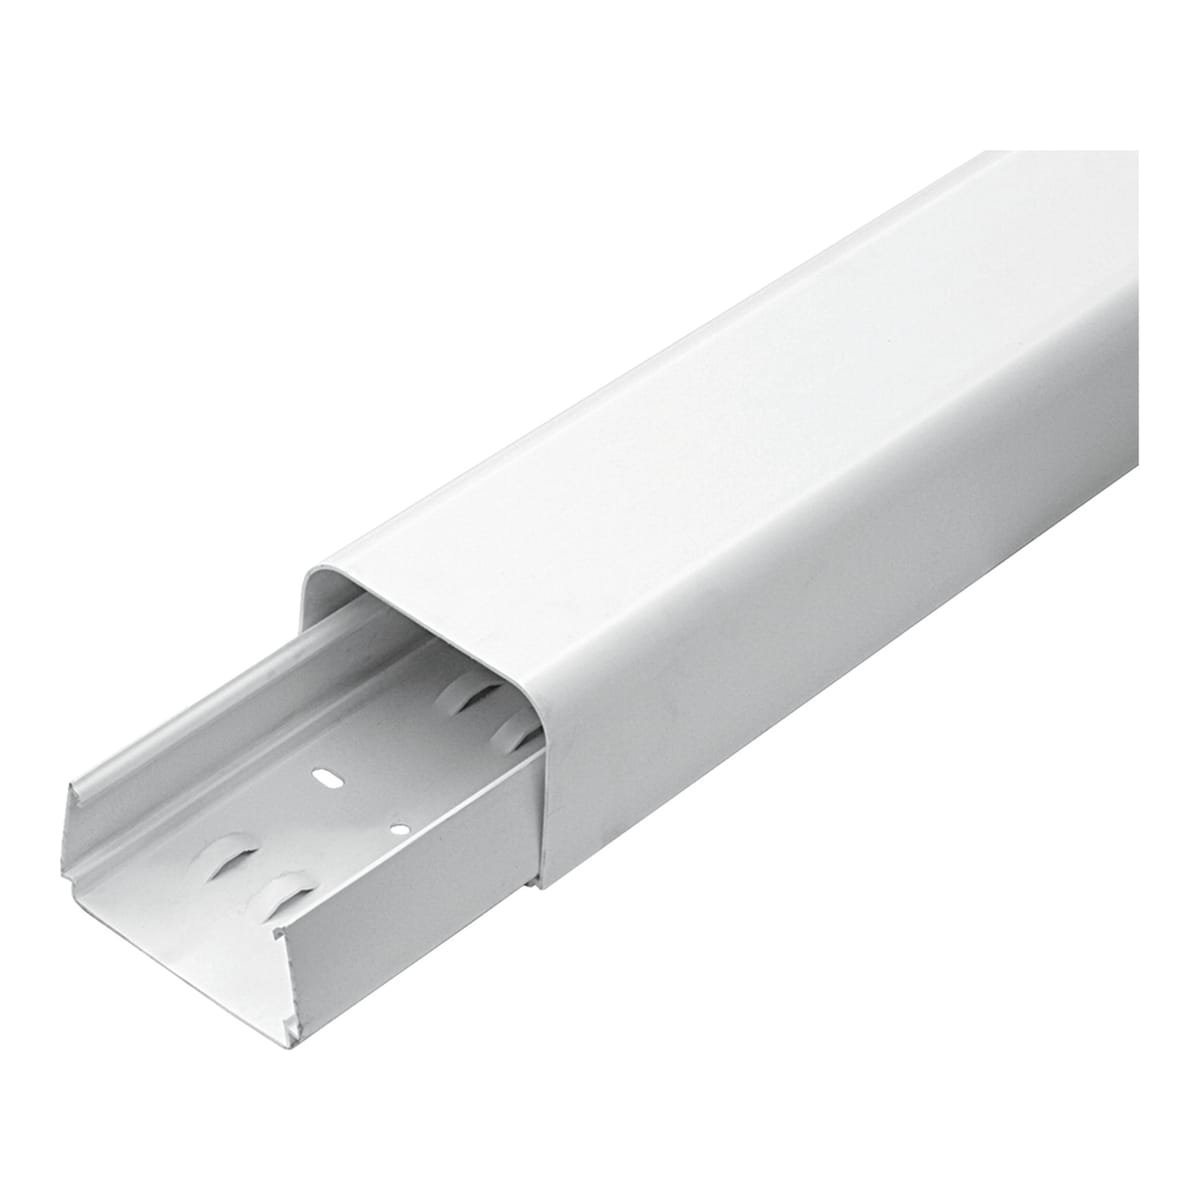 U-SHAPED CLIMATE DUCT 90X65 MM WHITE